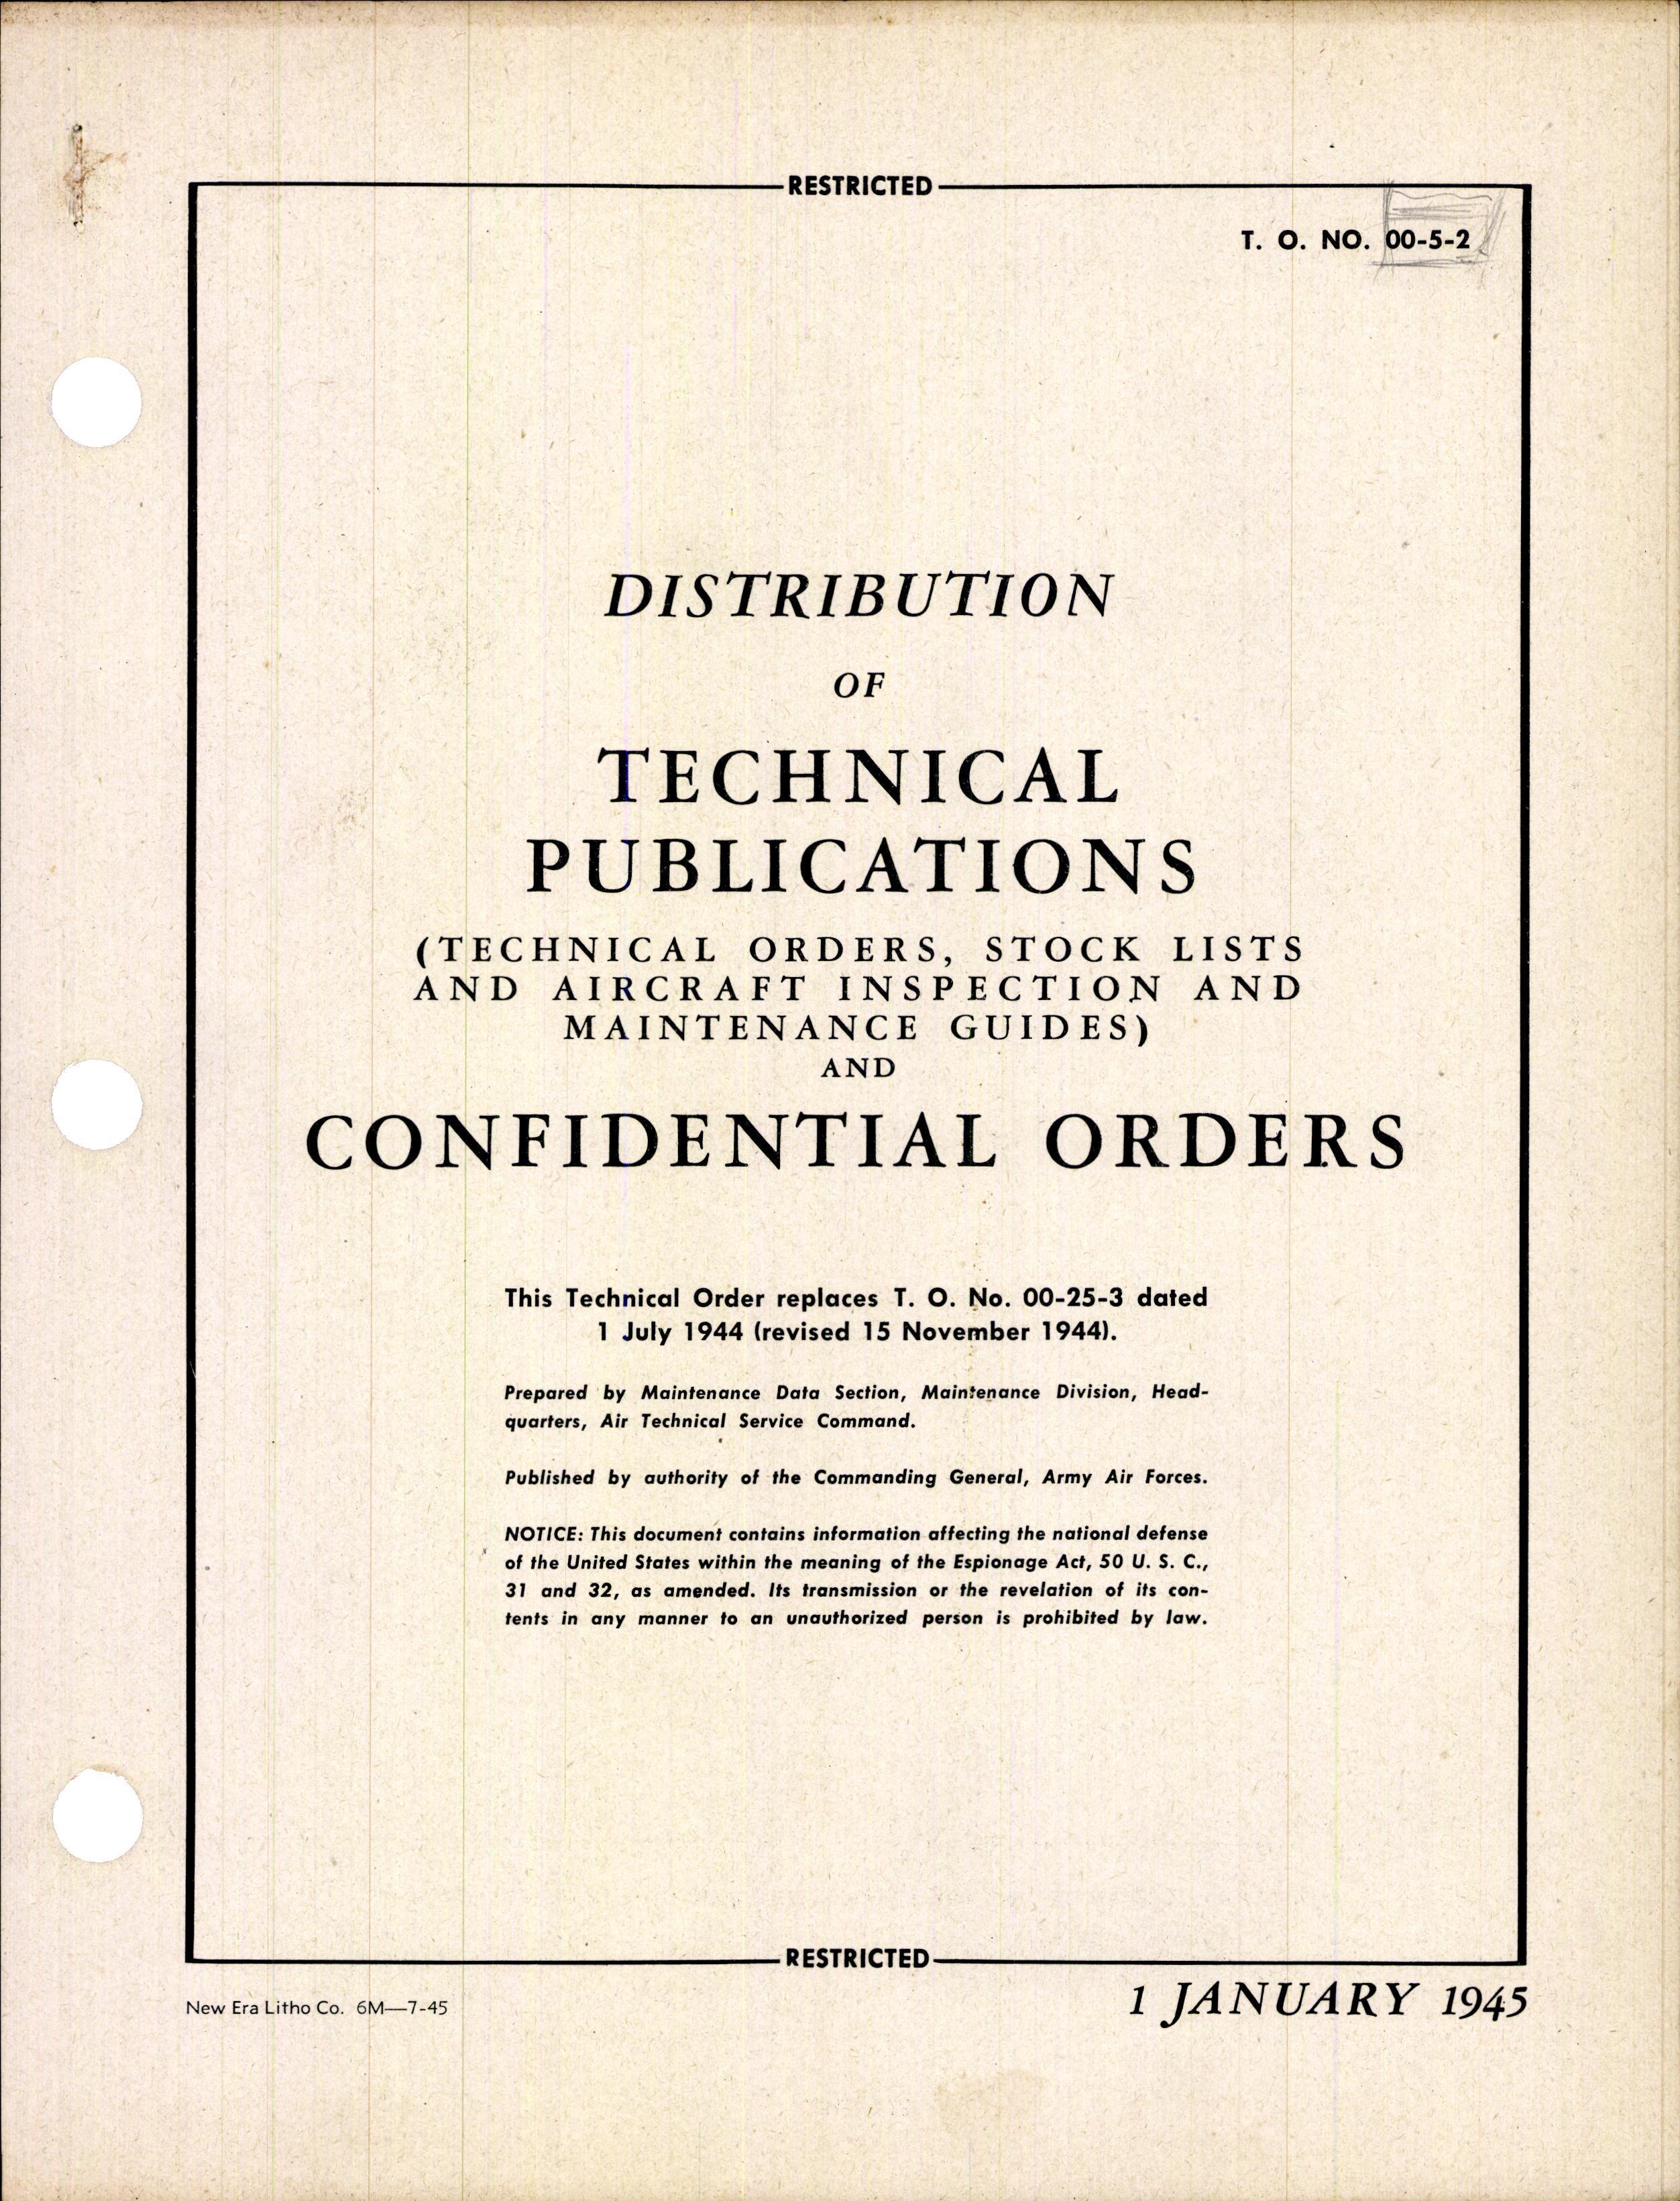 Sample page 1 from AirCorps Library document: Distribution of Technical Publications